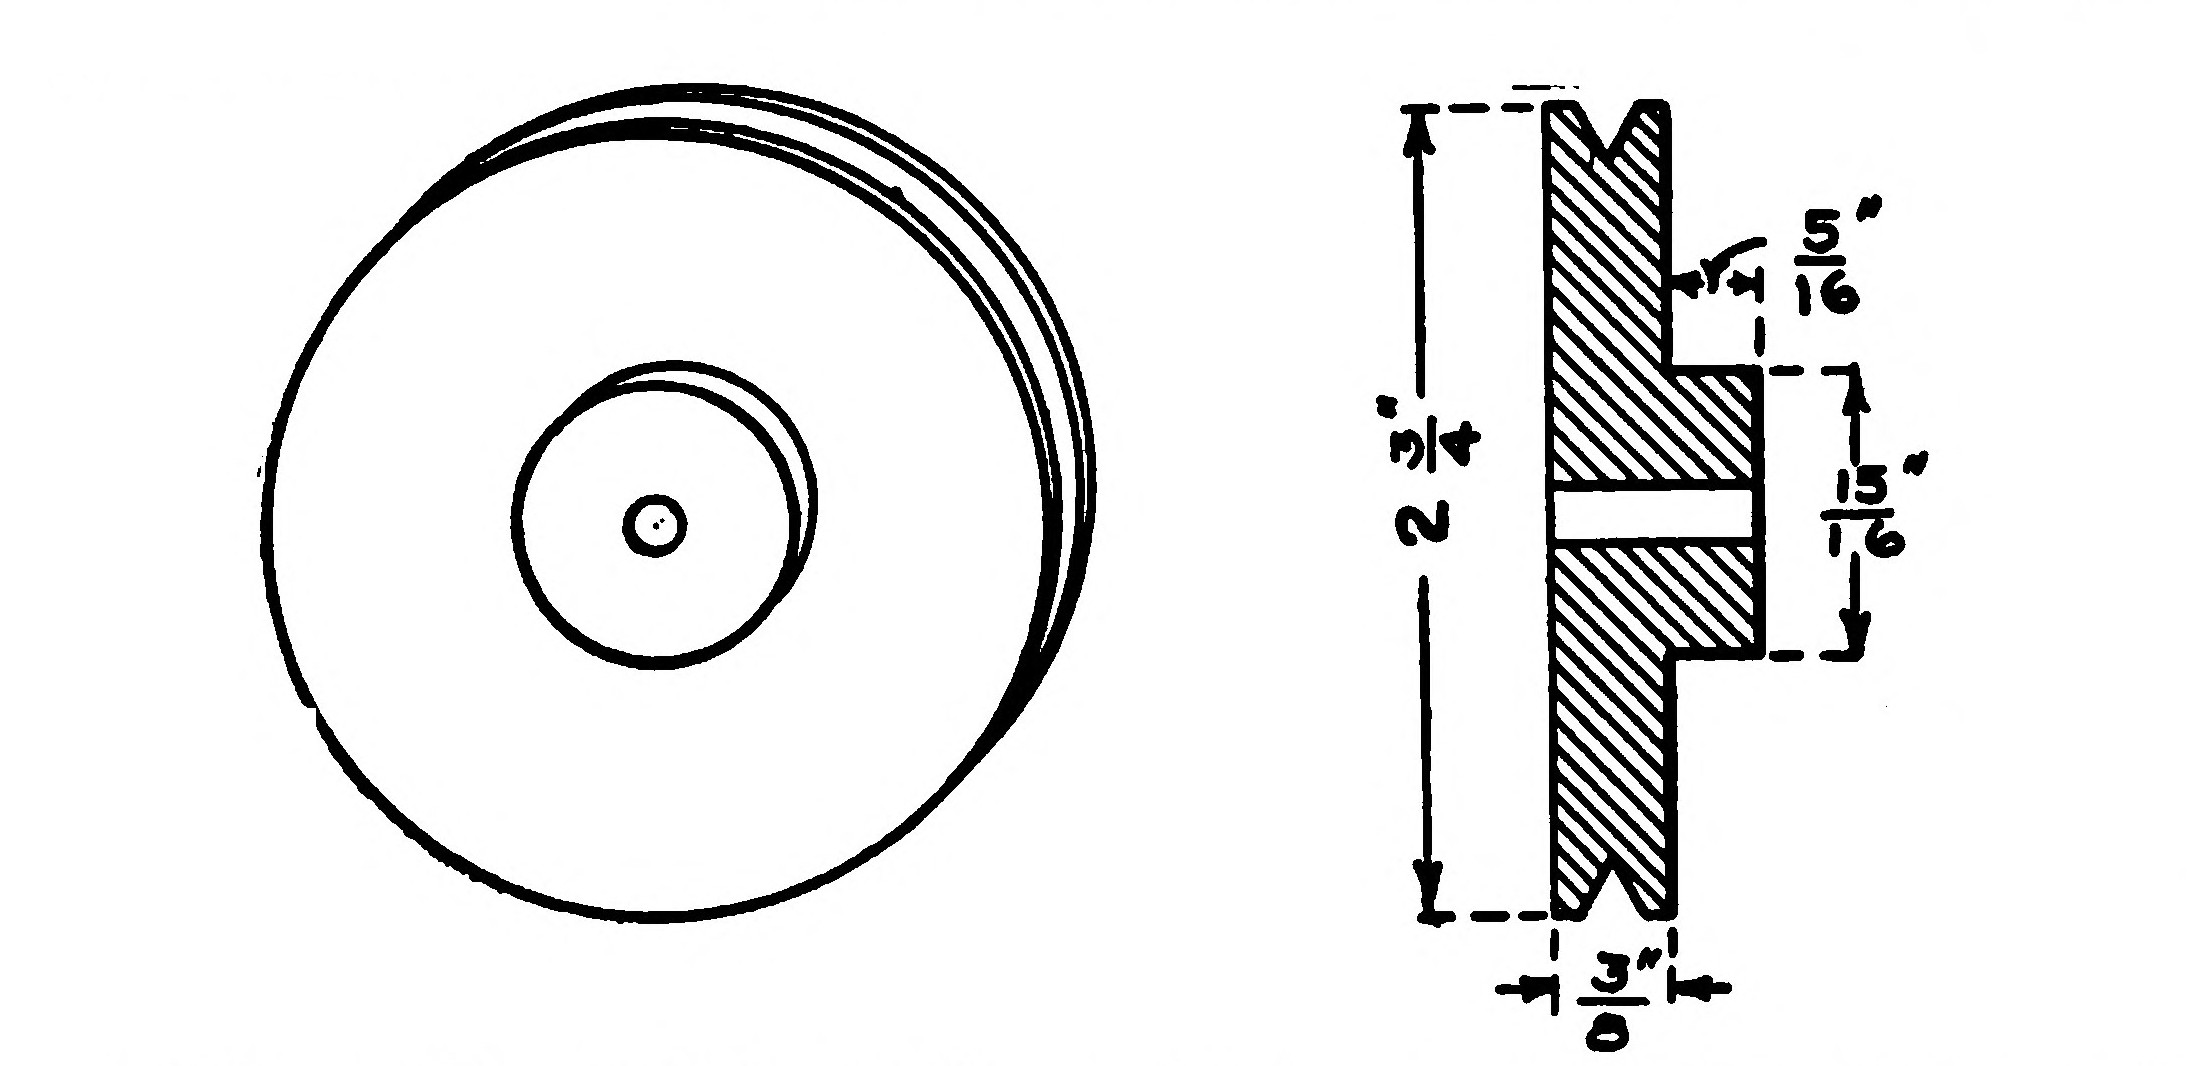 FIG. 8.—The Driving Pulleys.